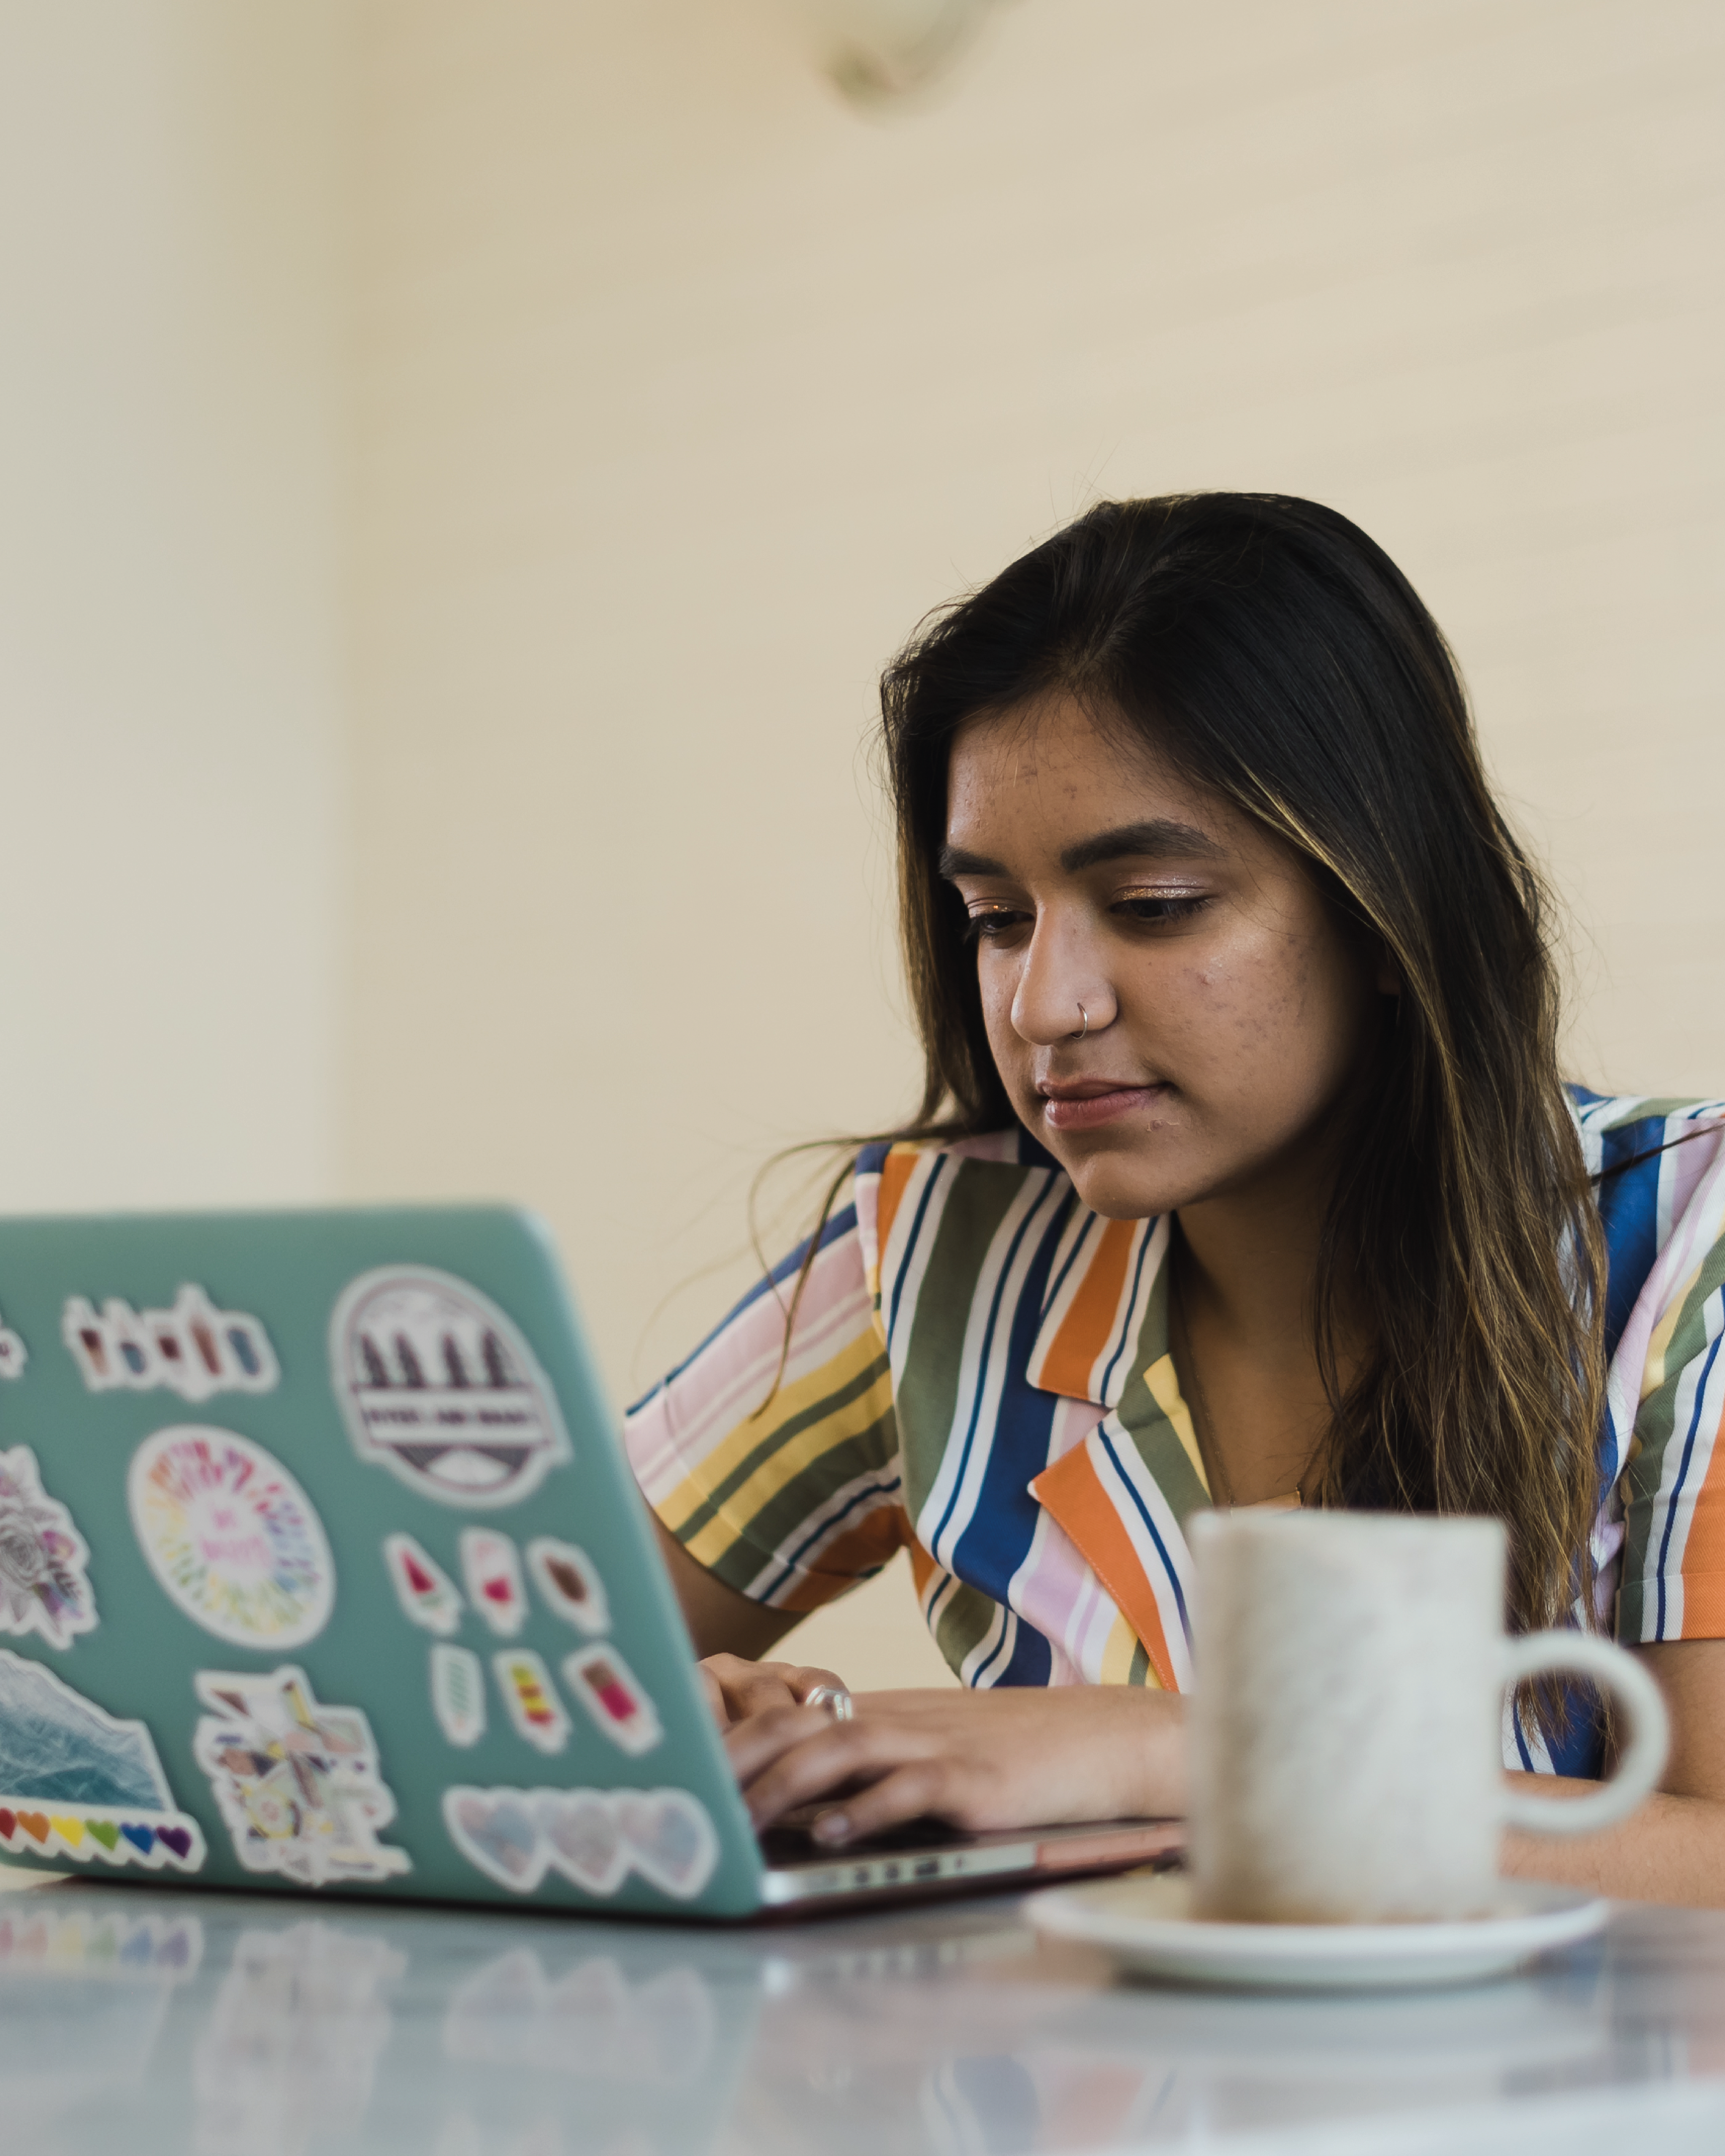 A young adult in a striped shirt on their laptop with a mug next to them